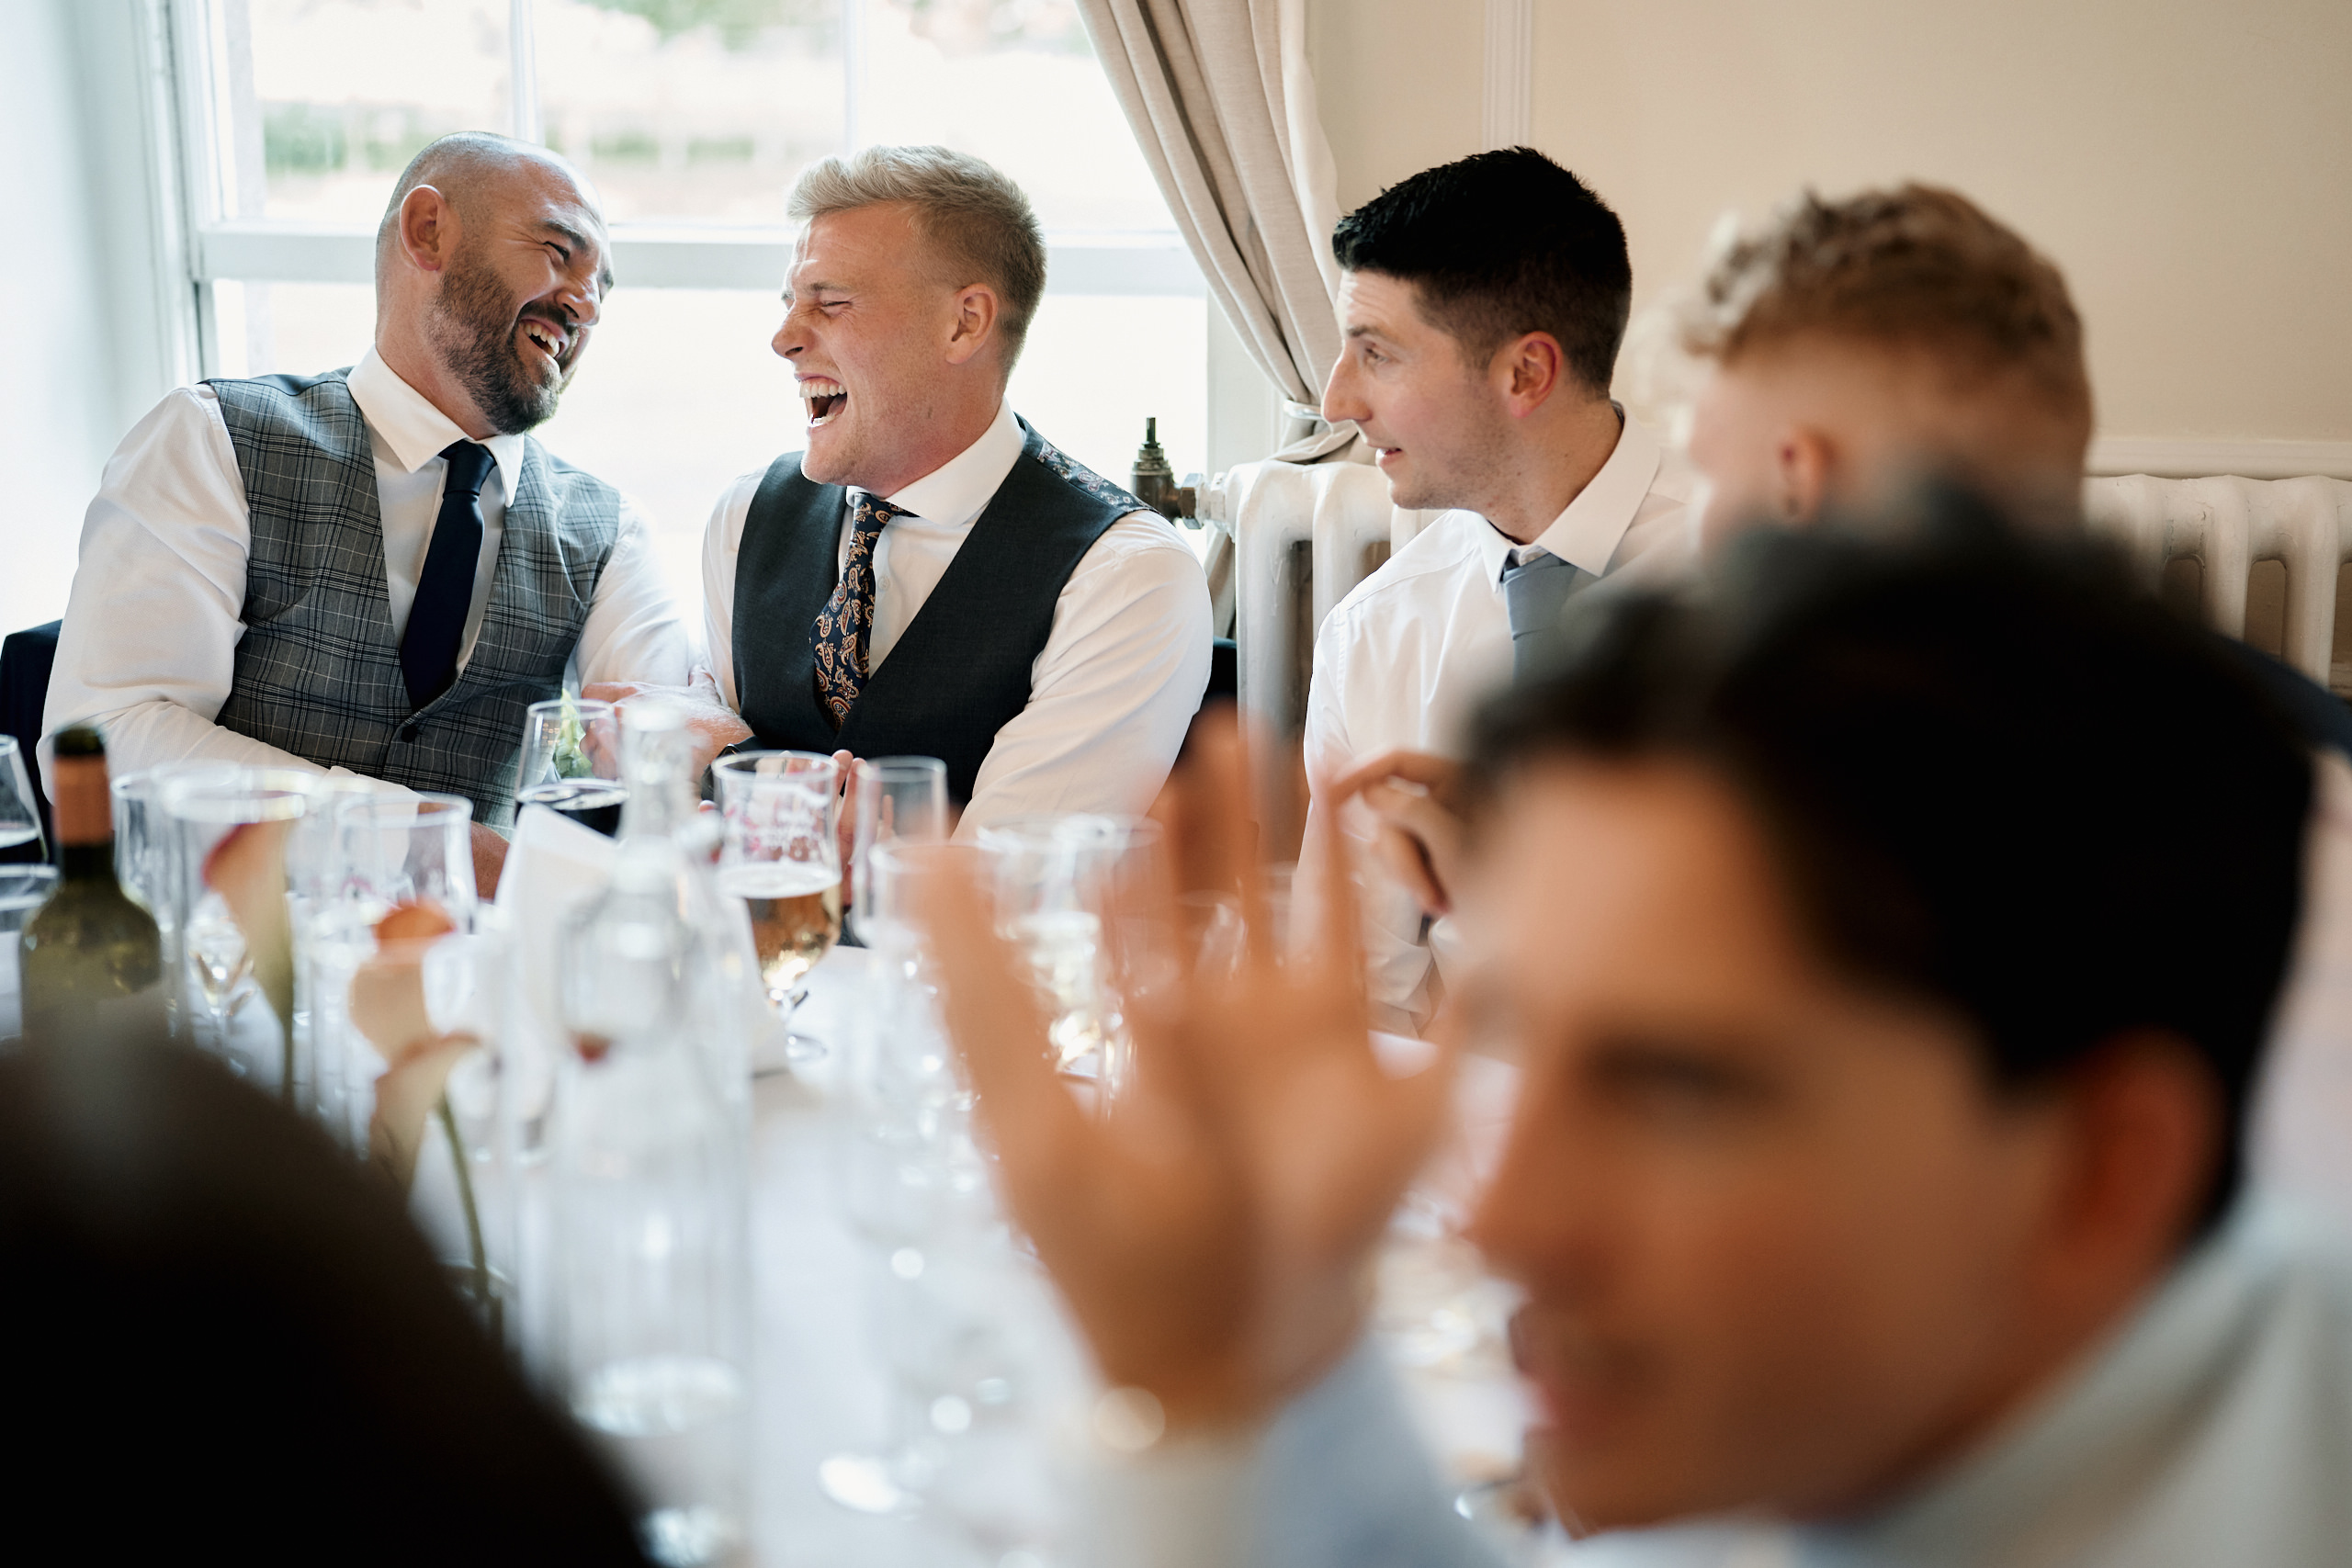 A group of men laughing at a table.